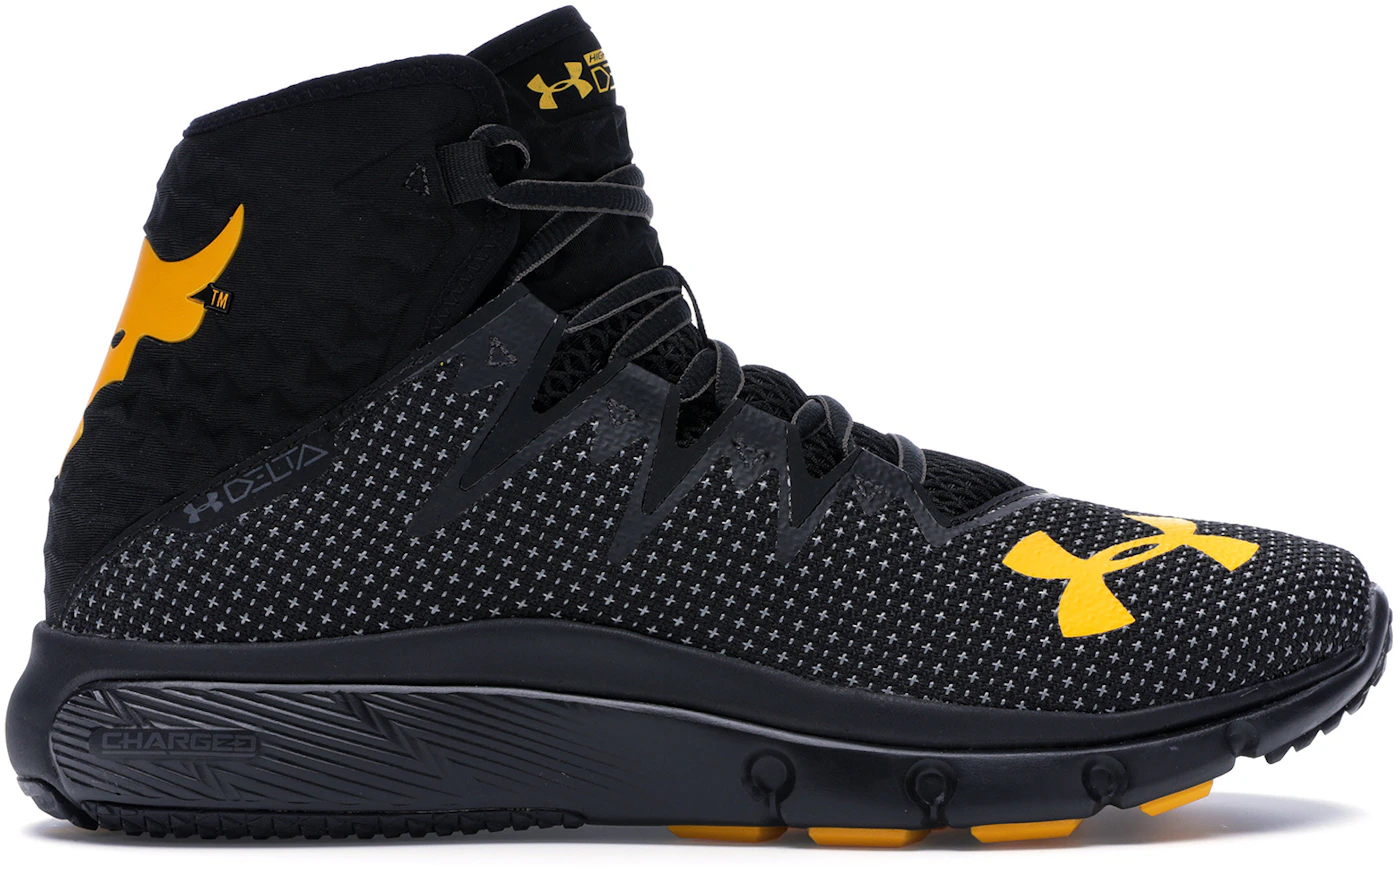 Exclusive: The Rock Gets His Own Signature Sneaker From Under Armour